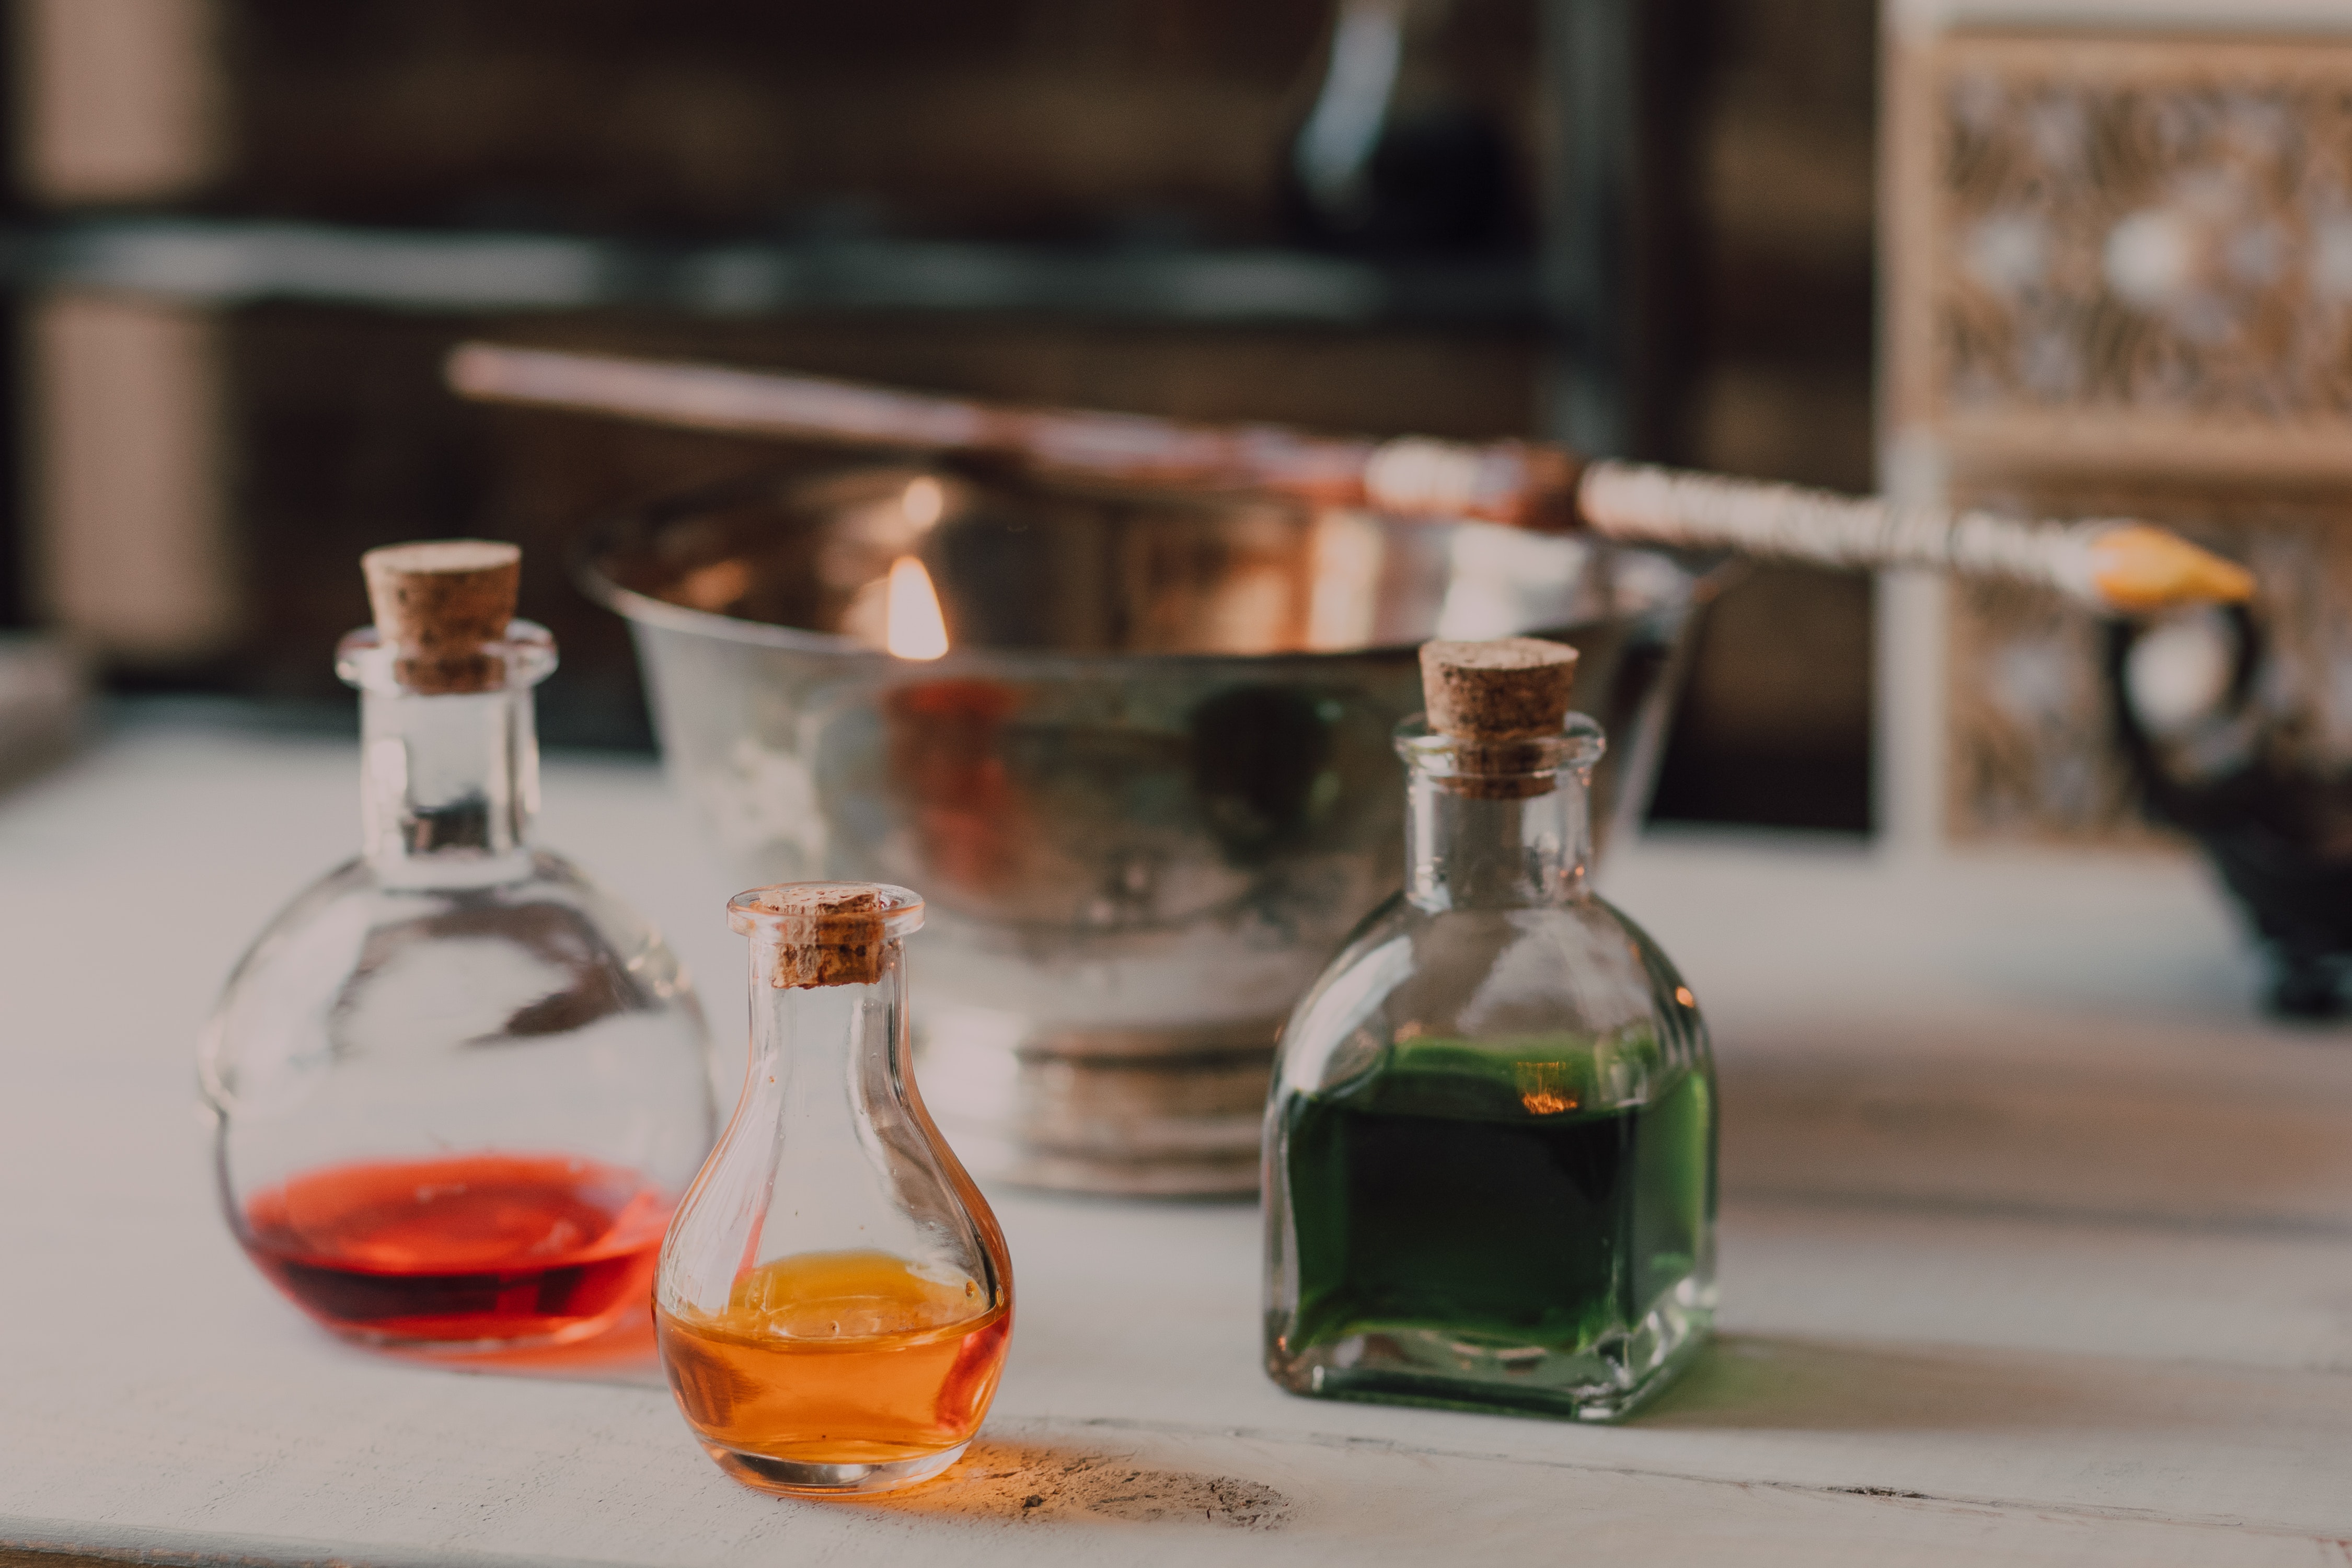 Others went so far as to assume he was making potions. | Source: Pexels